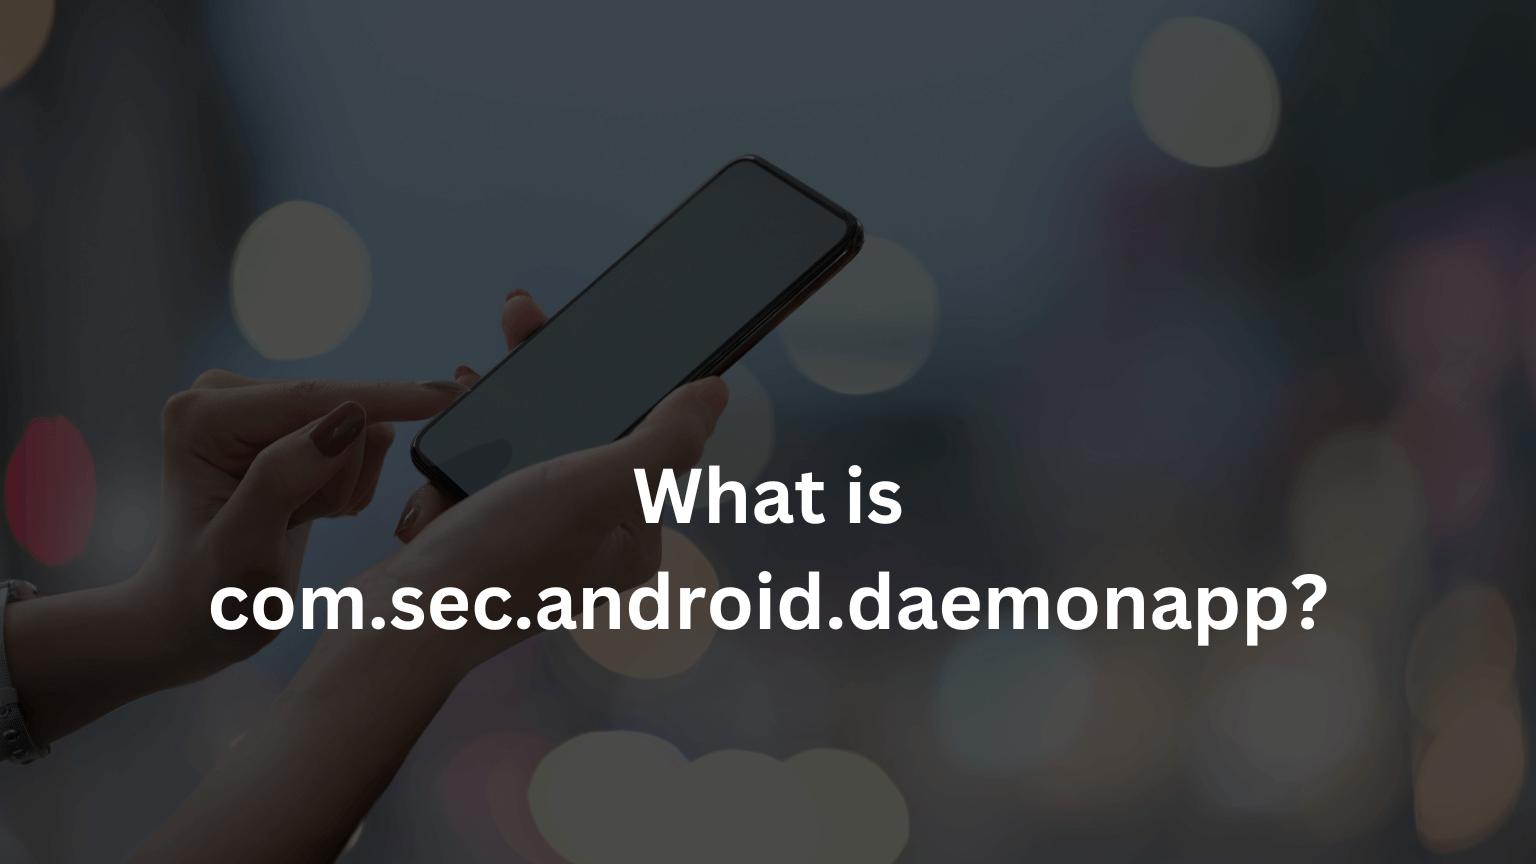 What is com.sec.android.daemonapp?